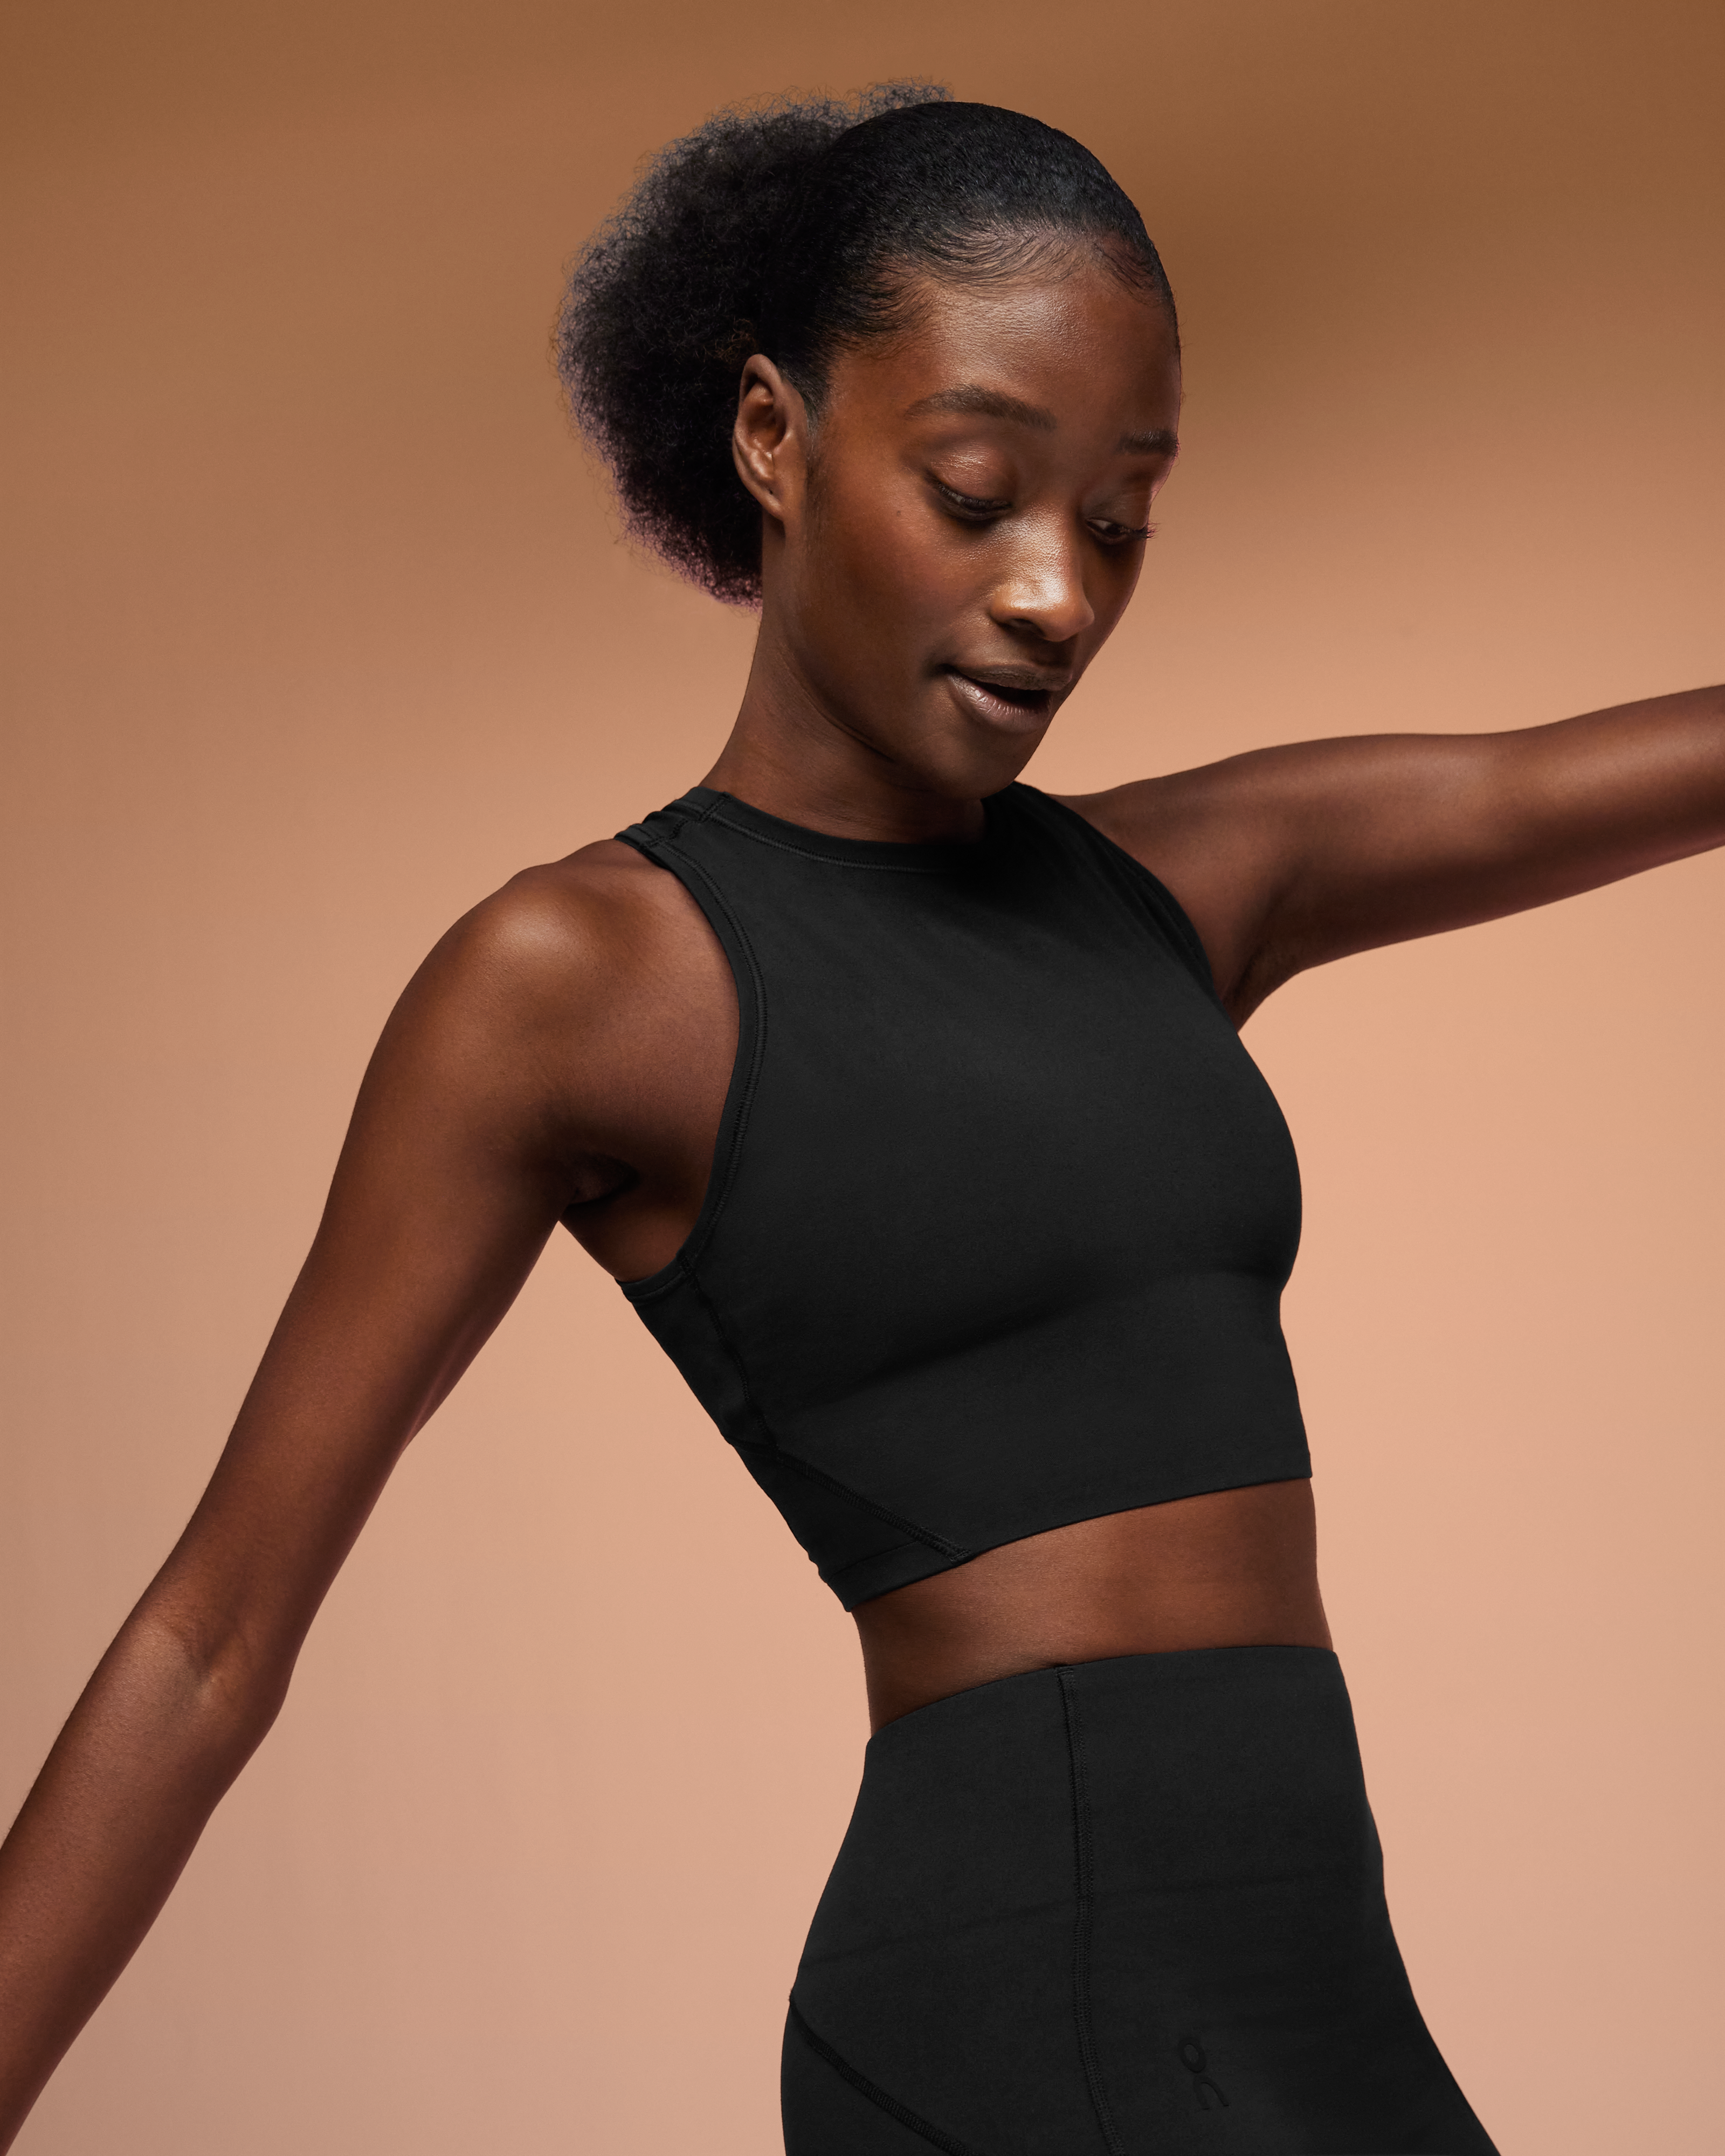 Run, don't walk! Big brand active crop tops at oh-so-low prices